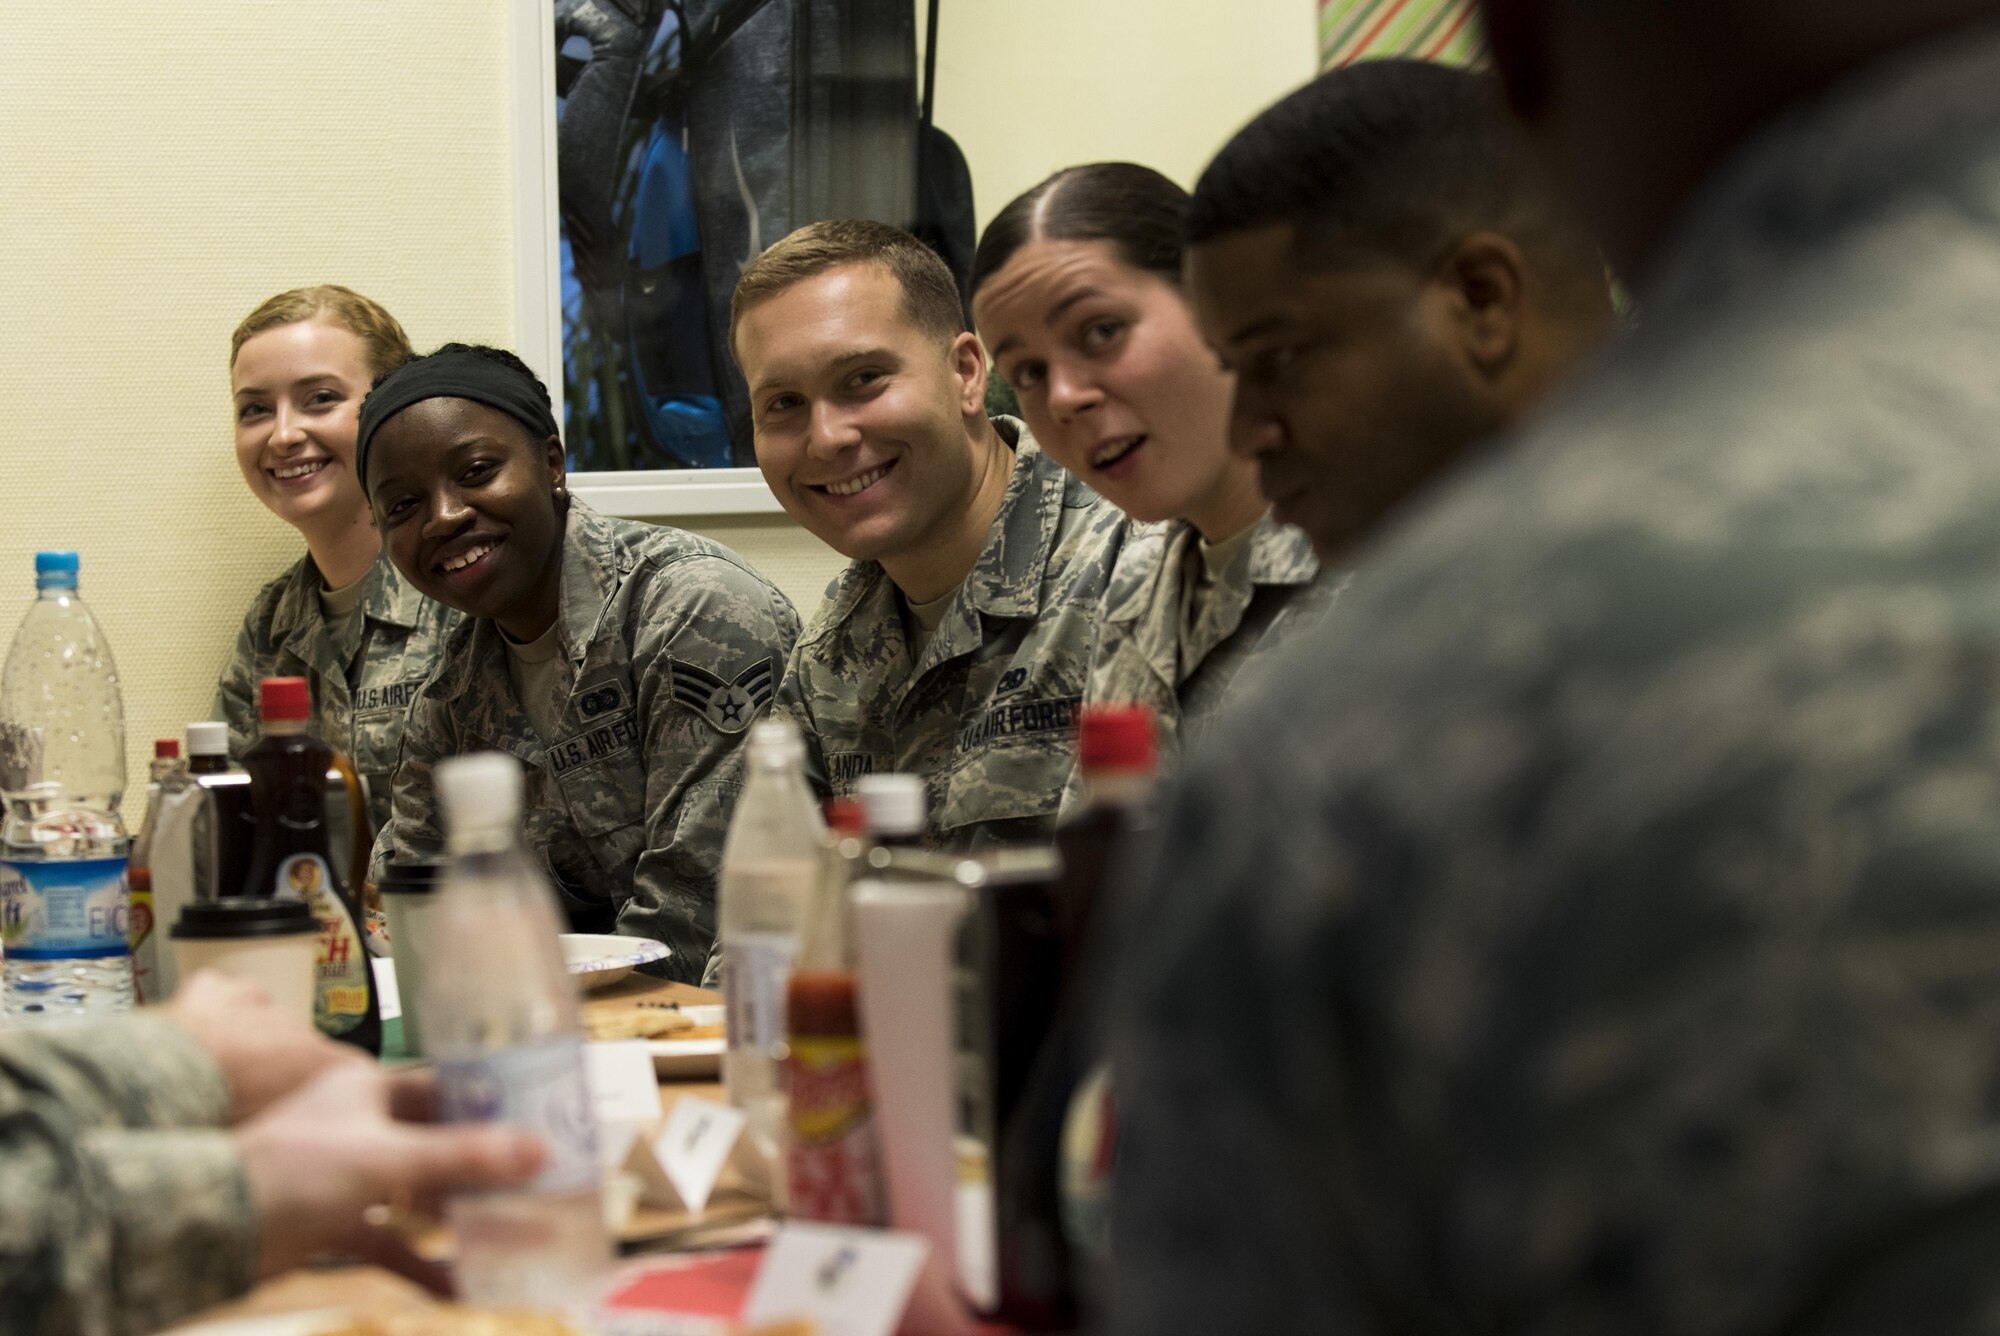 Airmen assigned to the 52nd Fighter Wing have breakfast with U.S. Air Force Lt. Gen. Richard Clark, 3rd Air Force
and 17th Expeditionary Air Force commander, right, and Chief Master Sgt. Phillip L. Easton, 3rd Air Force and 17th
Expeditionary Air Force command chief, center right, during a base familiarization tour at Spangdahlem Air Base, Dec. 14, 2016. Clark talked to the wing about his three main priorities: the importance of mission, inspiring Airmen and making time for family. (U.S. Air Force photo by Airman 1st Class Preston Cherry)